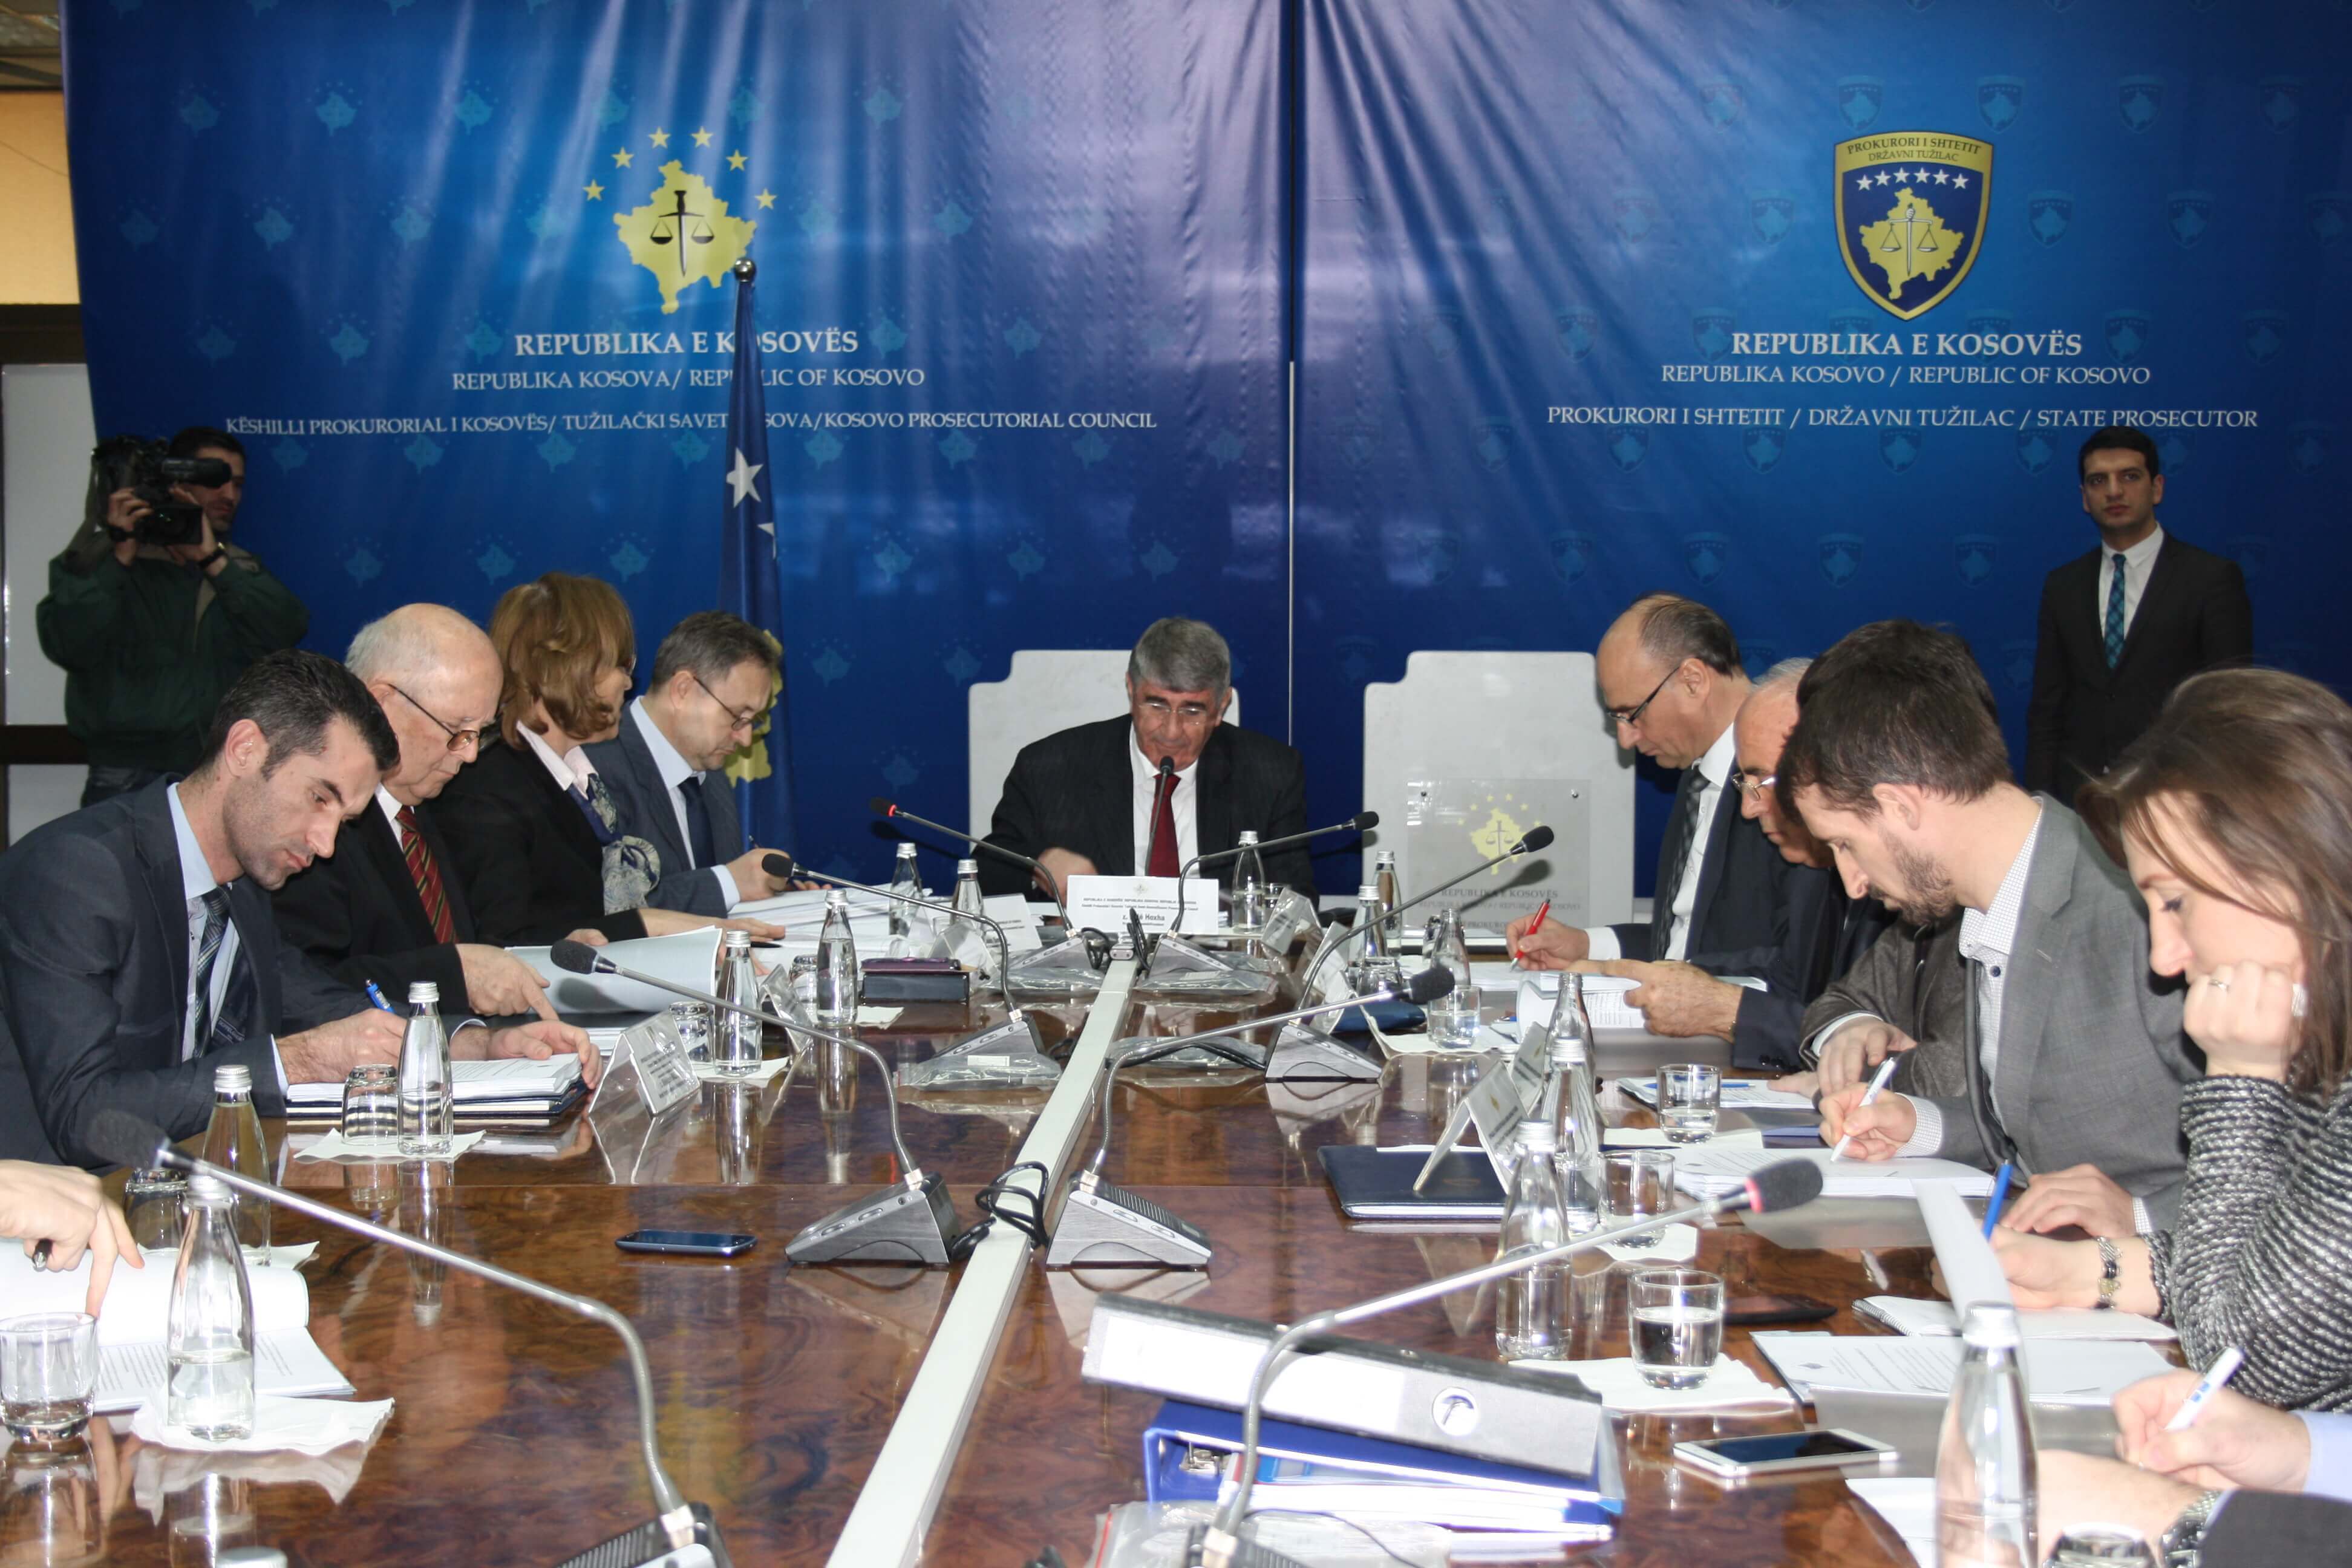 THERE IS HELD THE NEXT MEETING OF KOSOVO PROSECUTORIAL COUNCIL